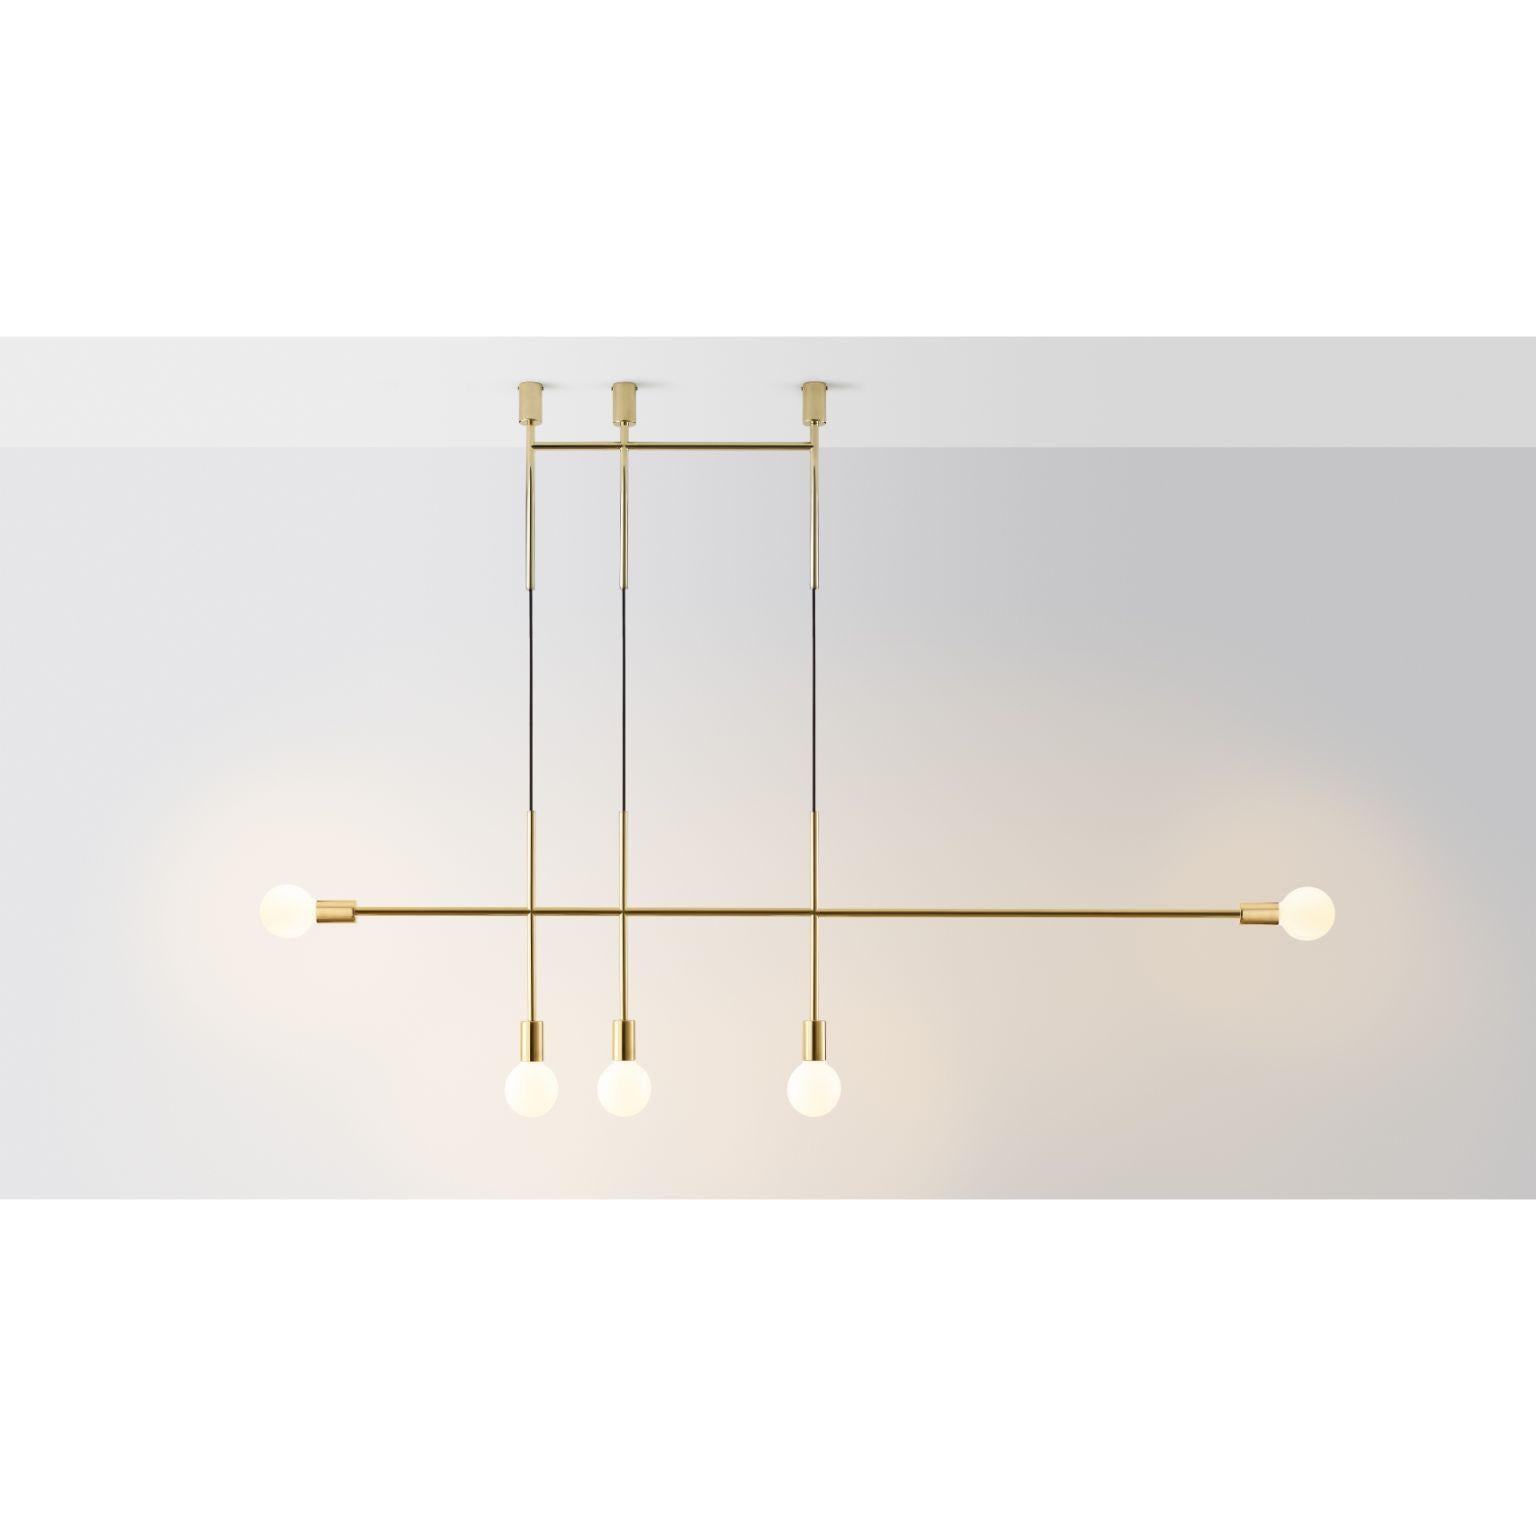 Big kick by Volker Haug
Dimensions: W 200 x H min 69 cm
Materials: Polished, bronzed brass or steel
Finish: : Raw, satin lacquer or powdercoa
Weight: approx 4.5 kg

Lamp: 240V E27 (120V E26 US) 

Step & Kick combines structural lines and